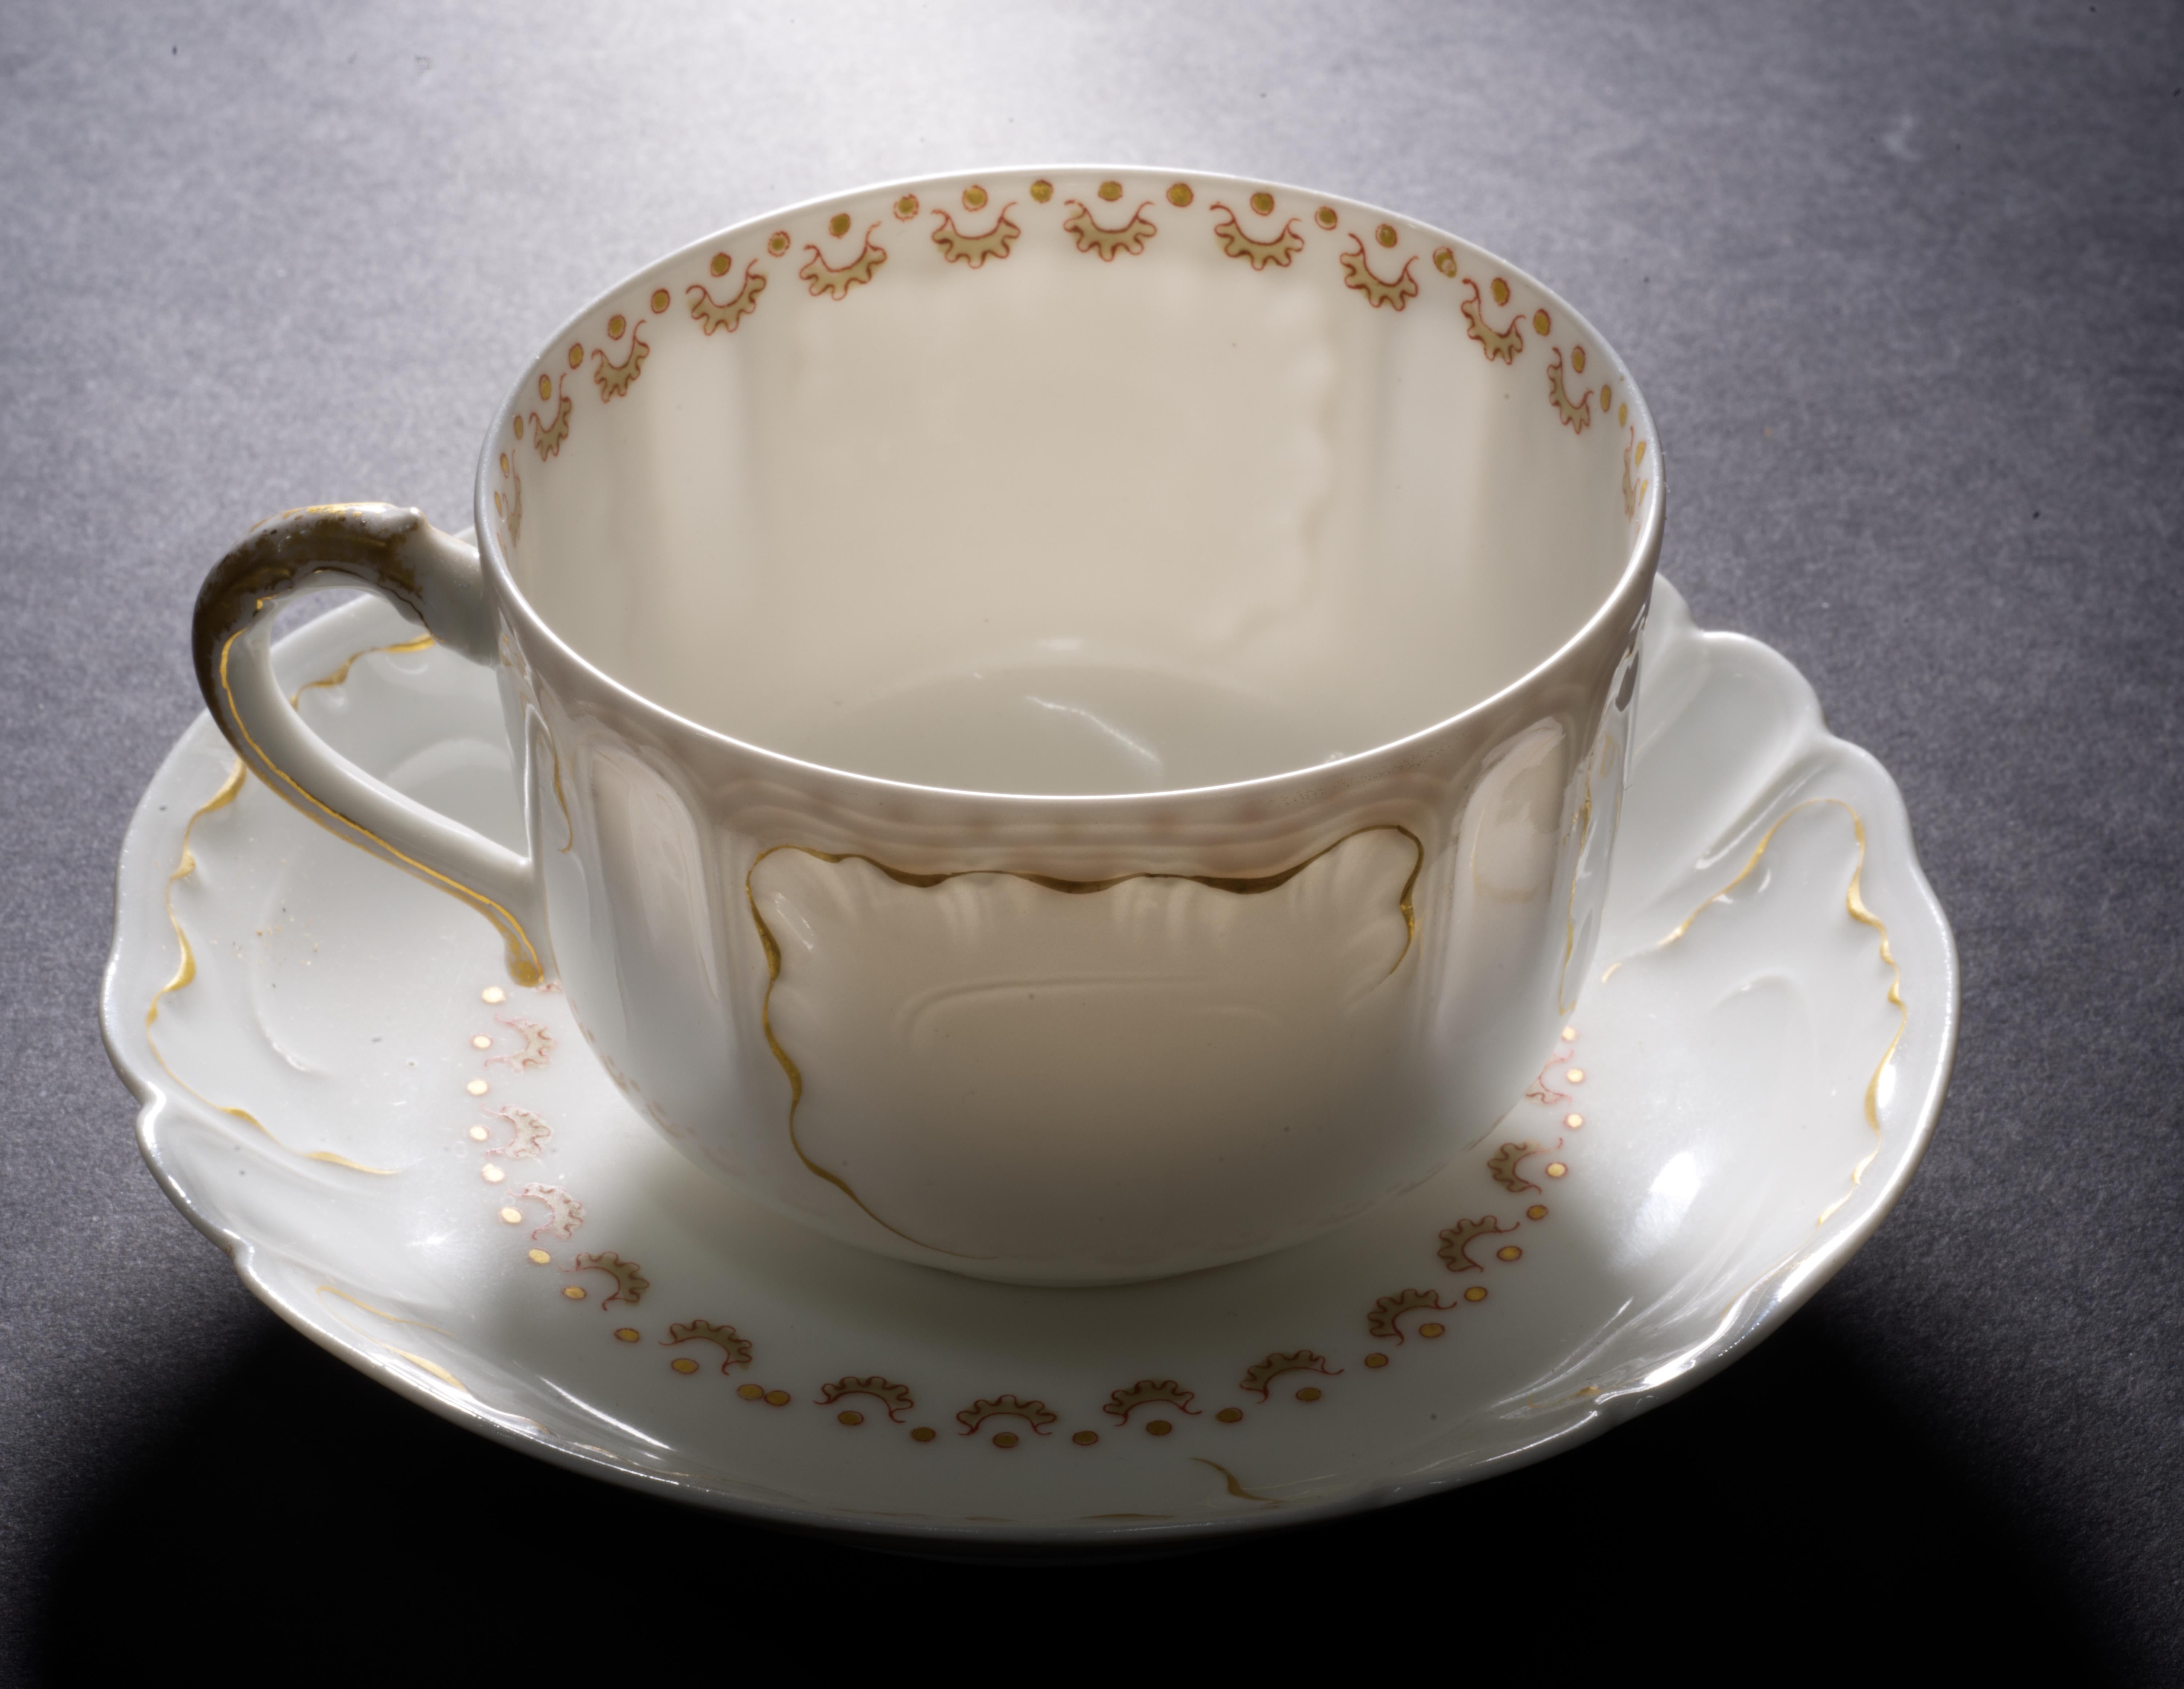 Rare Haviland Limoges Cup and Saucer Set Antique Porcelain, France 1890s In Good Condition For Sale In Clifton Springs, NY